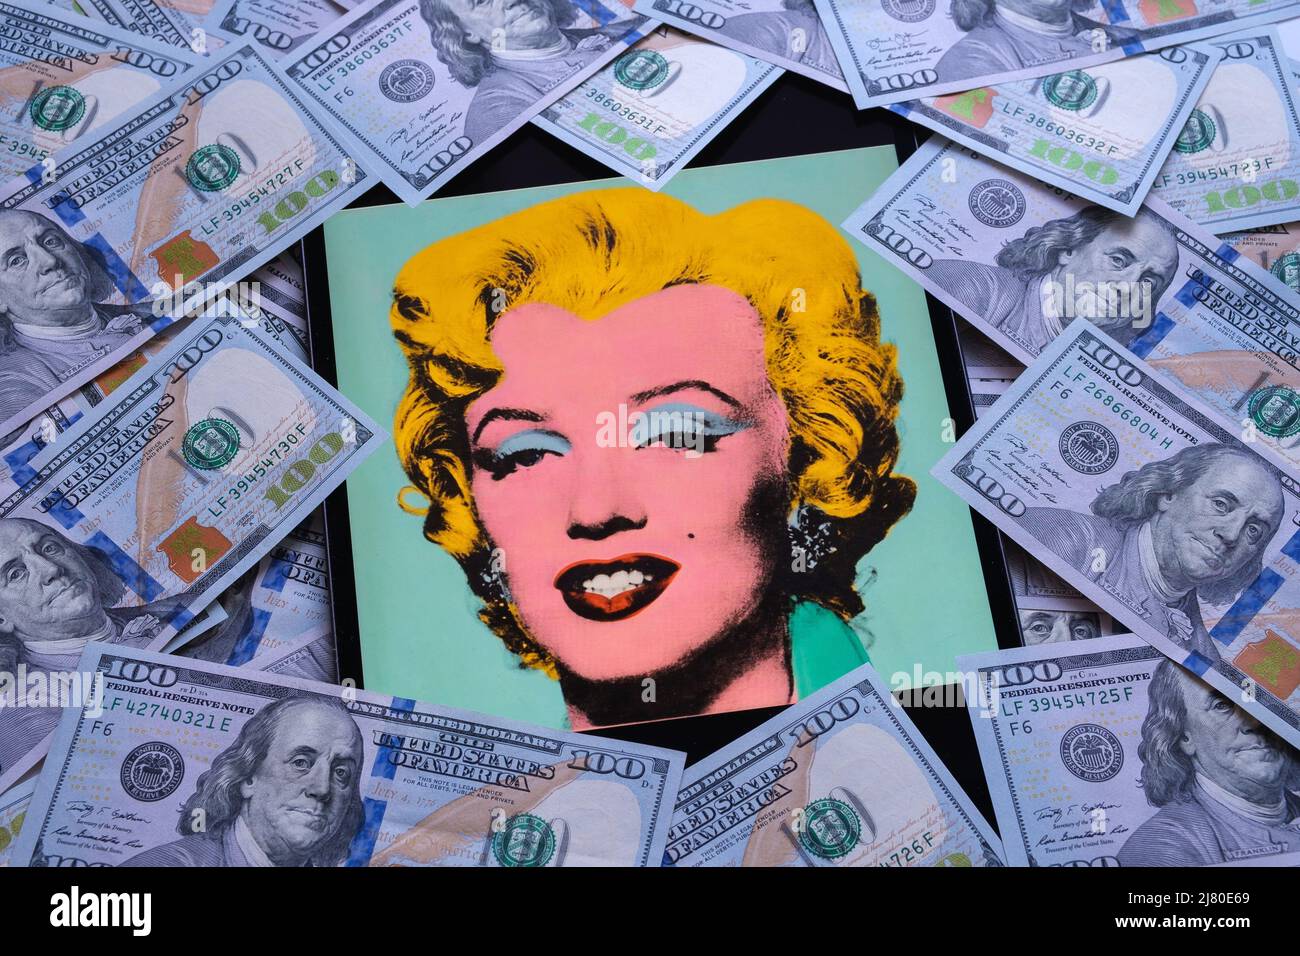 Shot Sage Blue Marilyn artwork on a screen of ipad surrounded by dollar banknotes. A portrait of Marilyn Monroe by Andy Warhol. Stafford, United Kingd Stock Photo